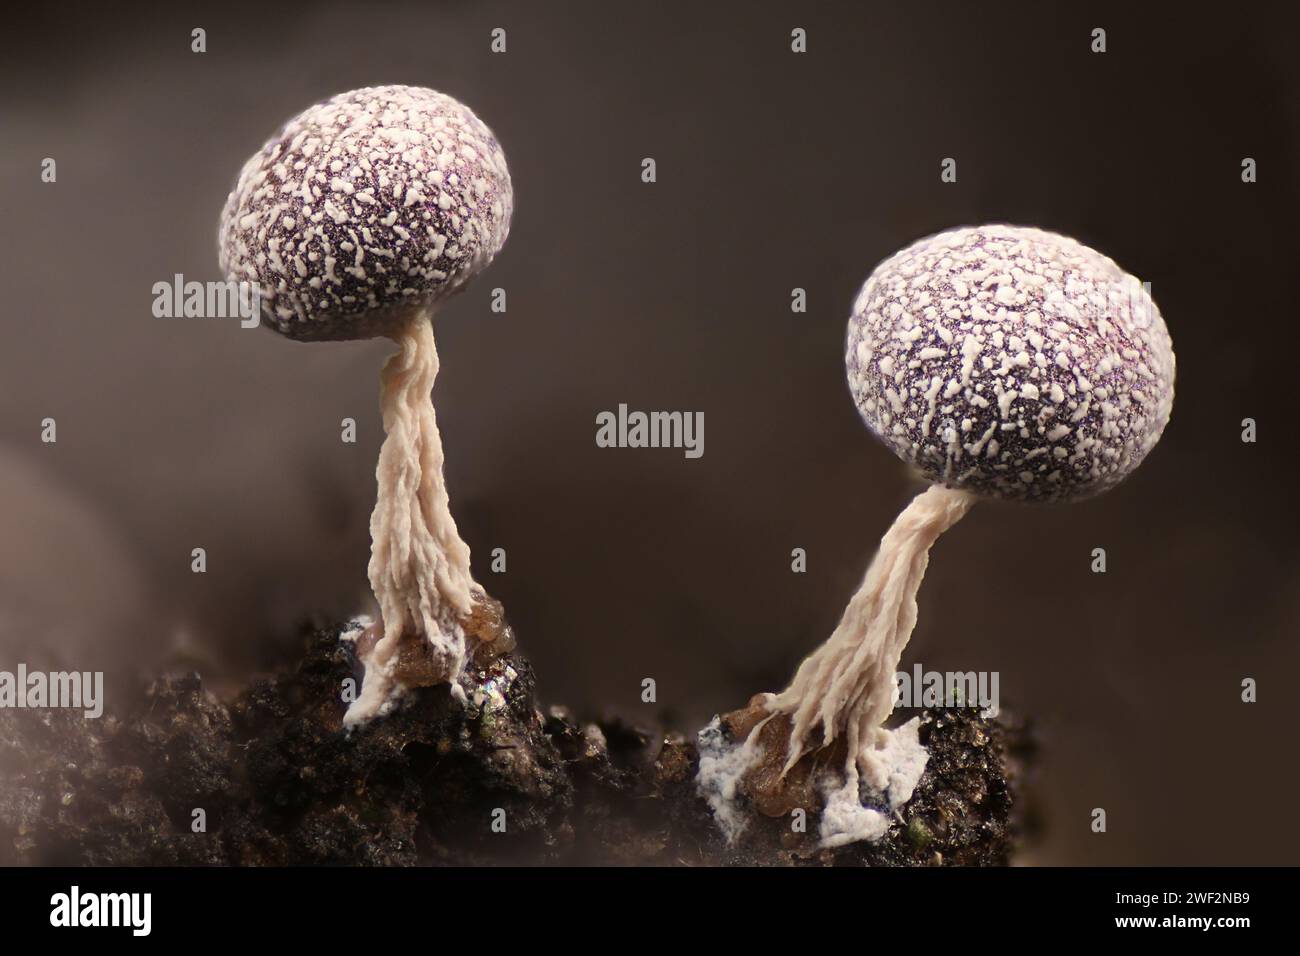 Physarum leucophaeum, a slime mold from Finland, microscope image of sporangia Stock Photo